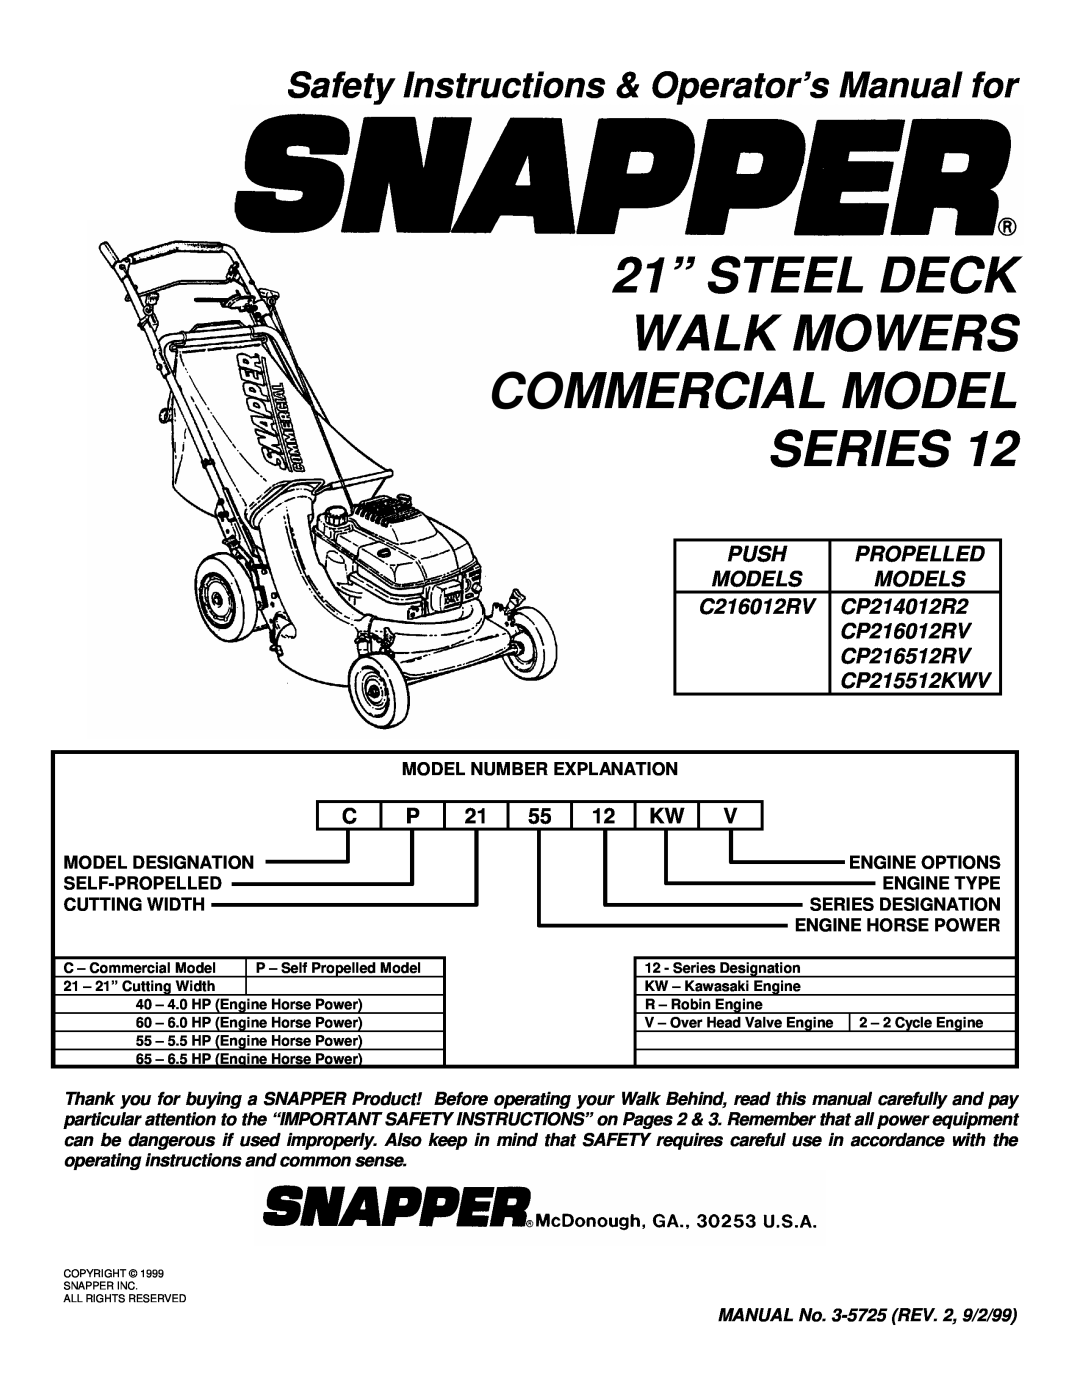 Snapper GP215512KWV important safety instructions 21” STEEL DECK, Walk Mowers Commercial Model Series, Push, Propelled 